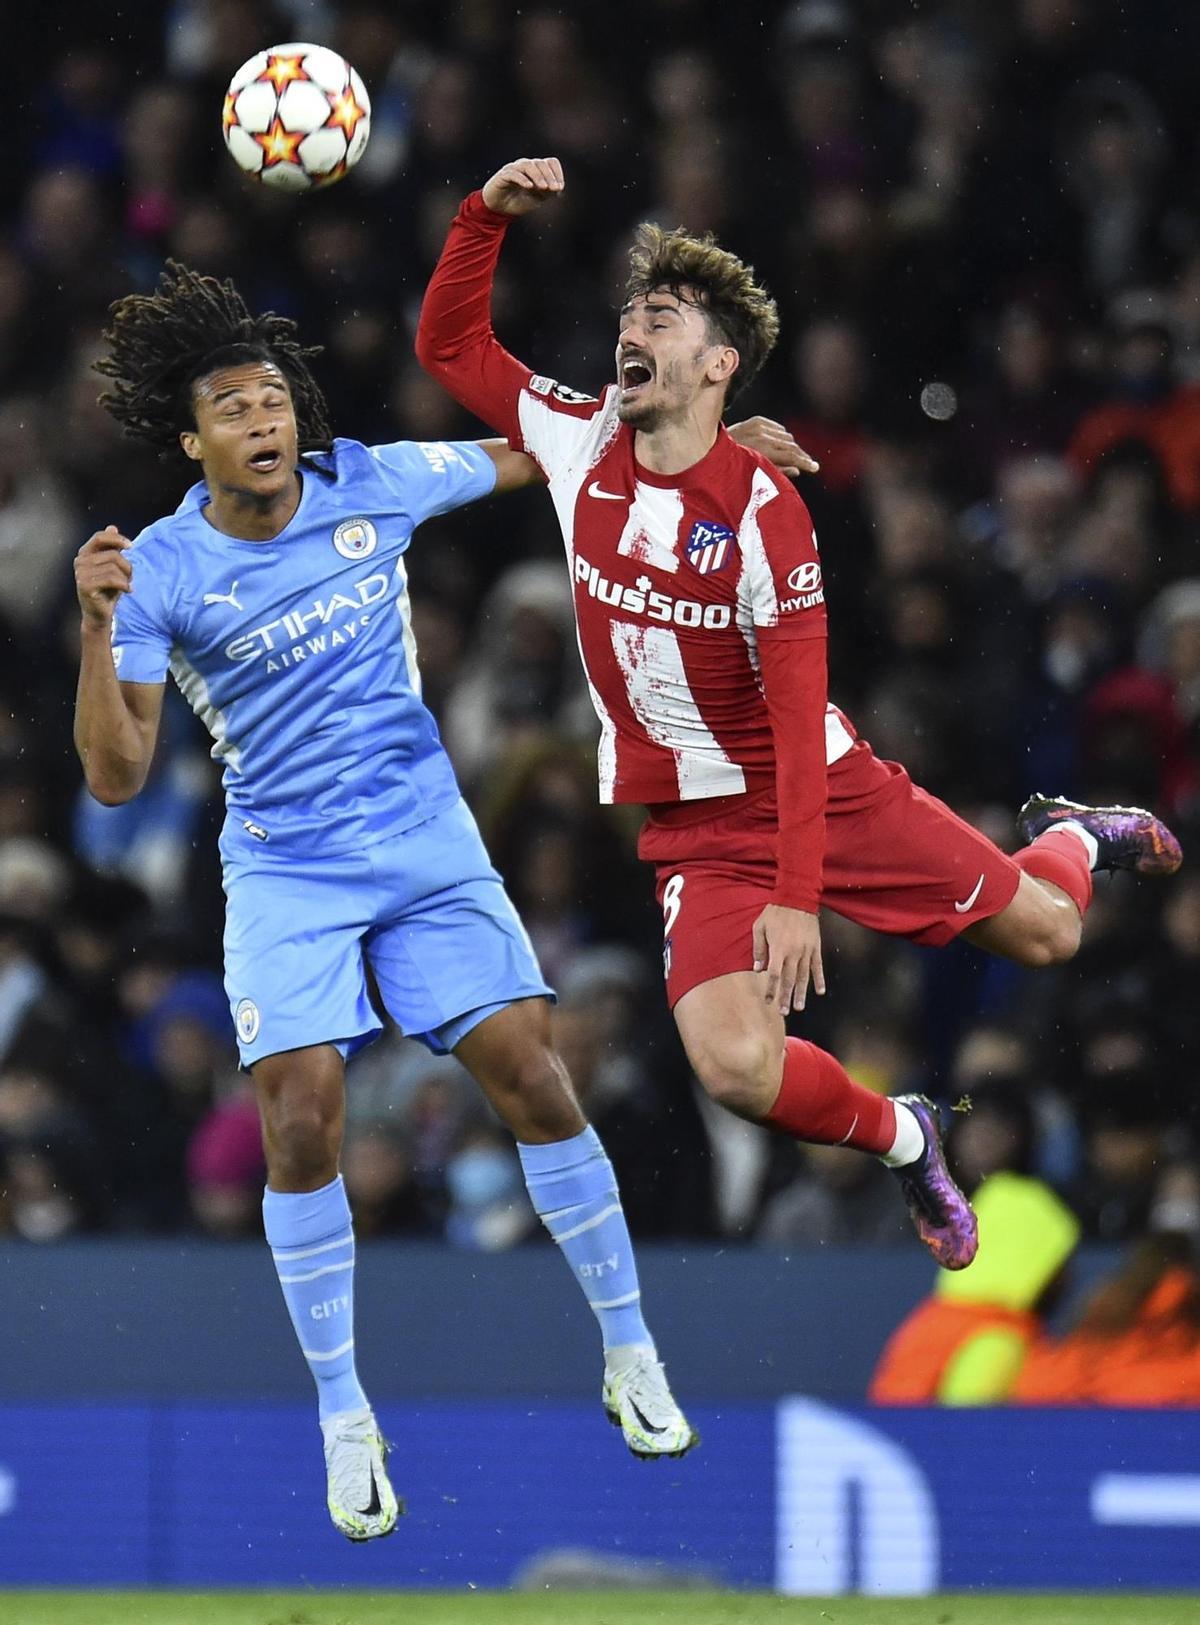 Manchester (United Kingdom), 05/04/2022.- Nathan Ake (L) of Manchester City in action against Antoine Griezmann (R) of Atletico Madrid during the UEFA Champions League quarter final, first leg soccer match between Manchester City and Atletico Madrid in Manchester, Britain, 05 April 2022. (Liga de Campeones, Reino Unido) EFE/EPA/PETER POWELL